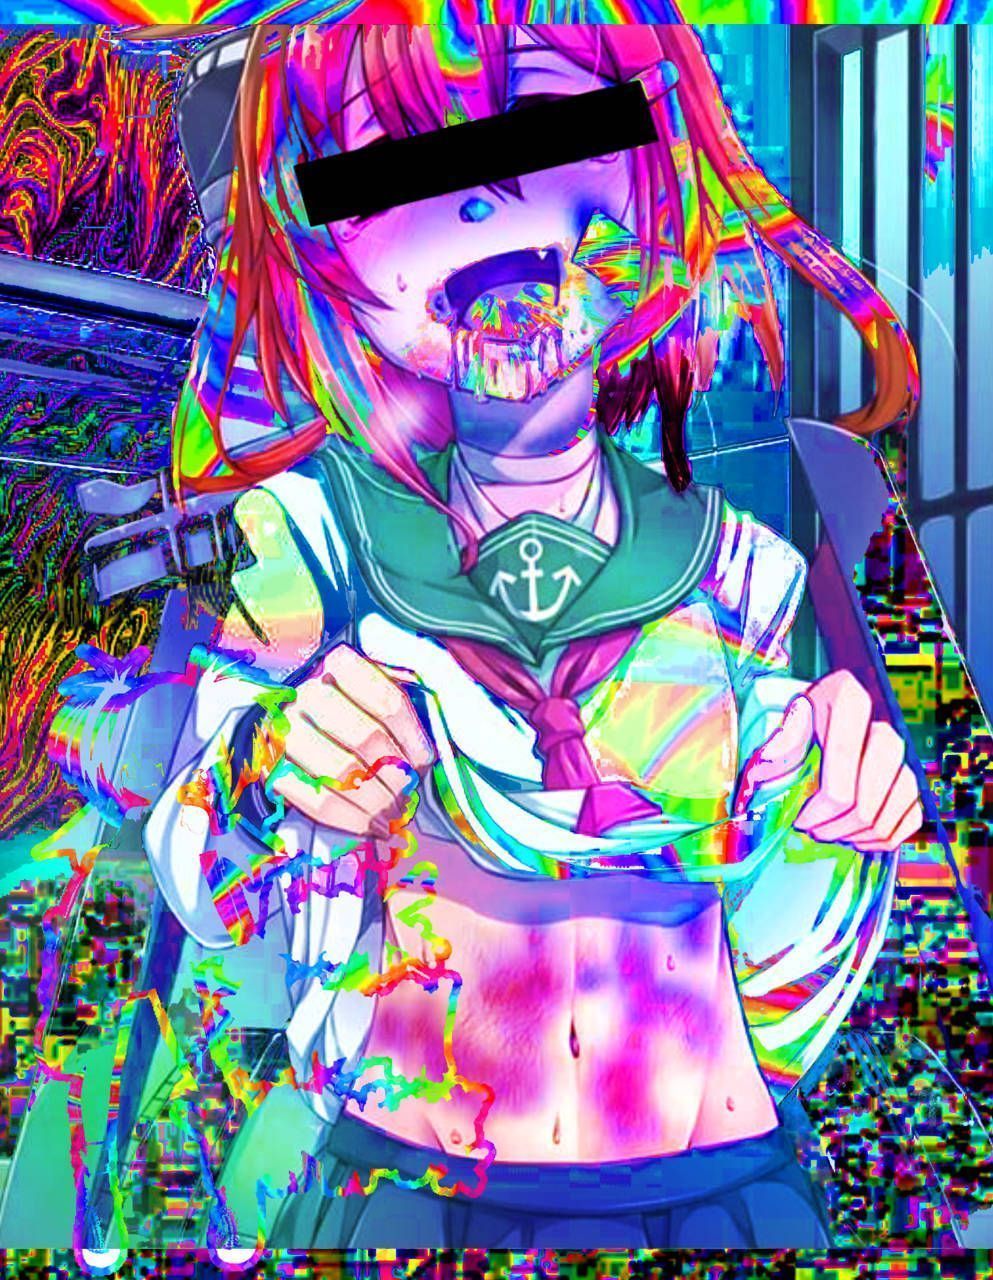 A girl with colorful hair and makeup - Glitchcore